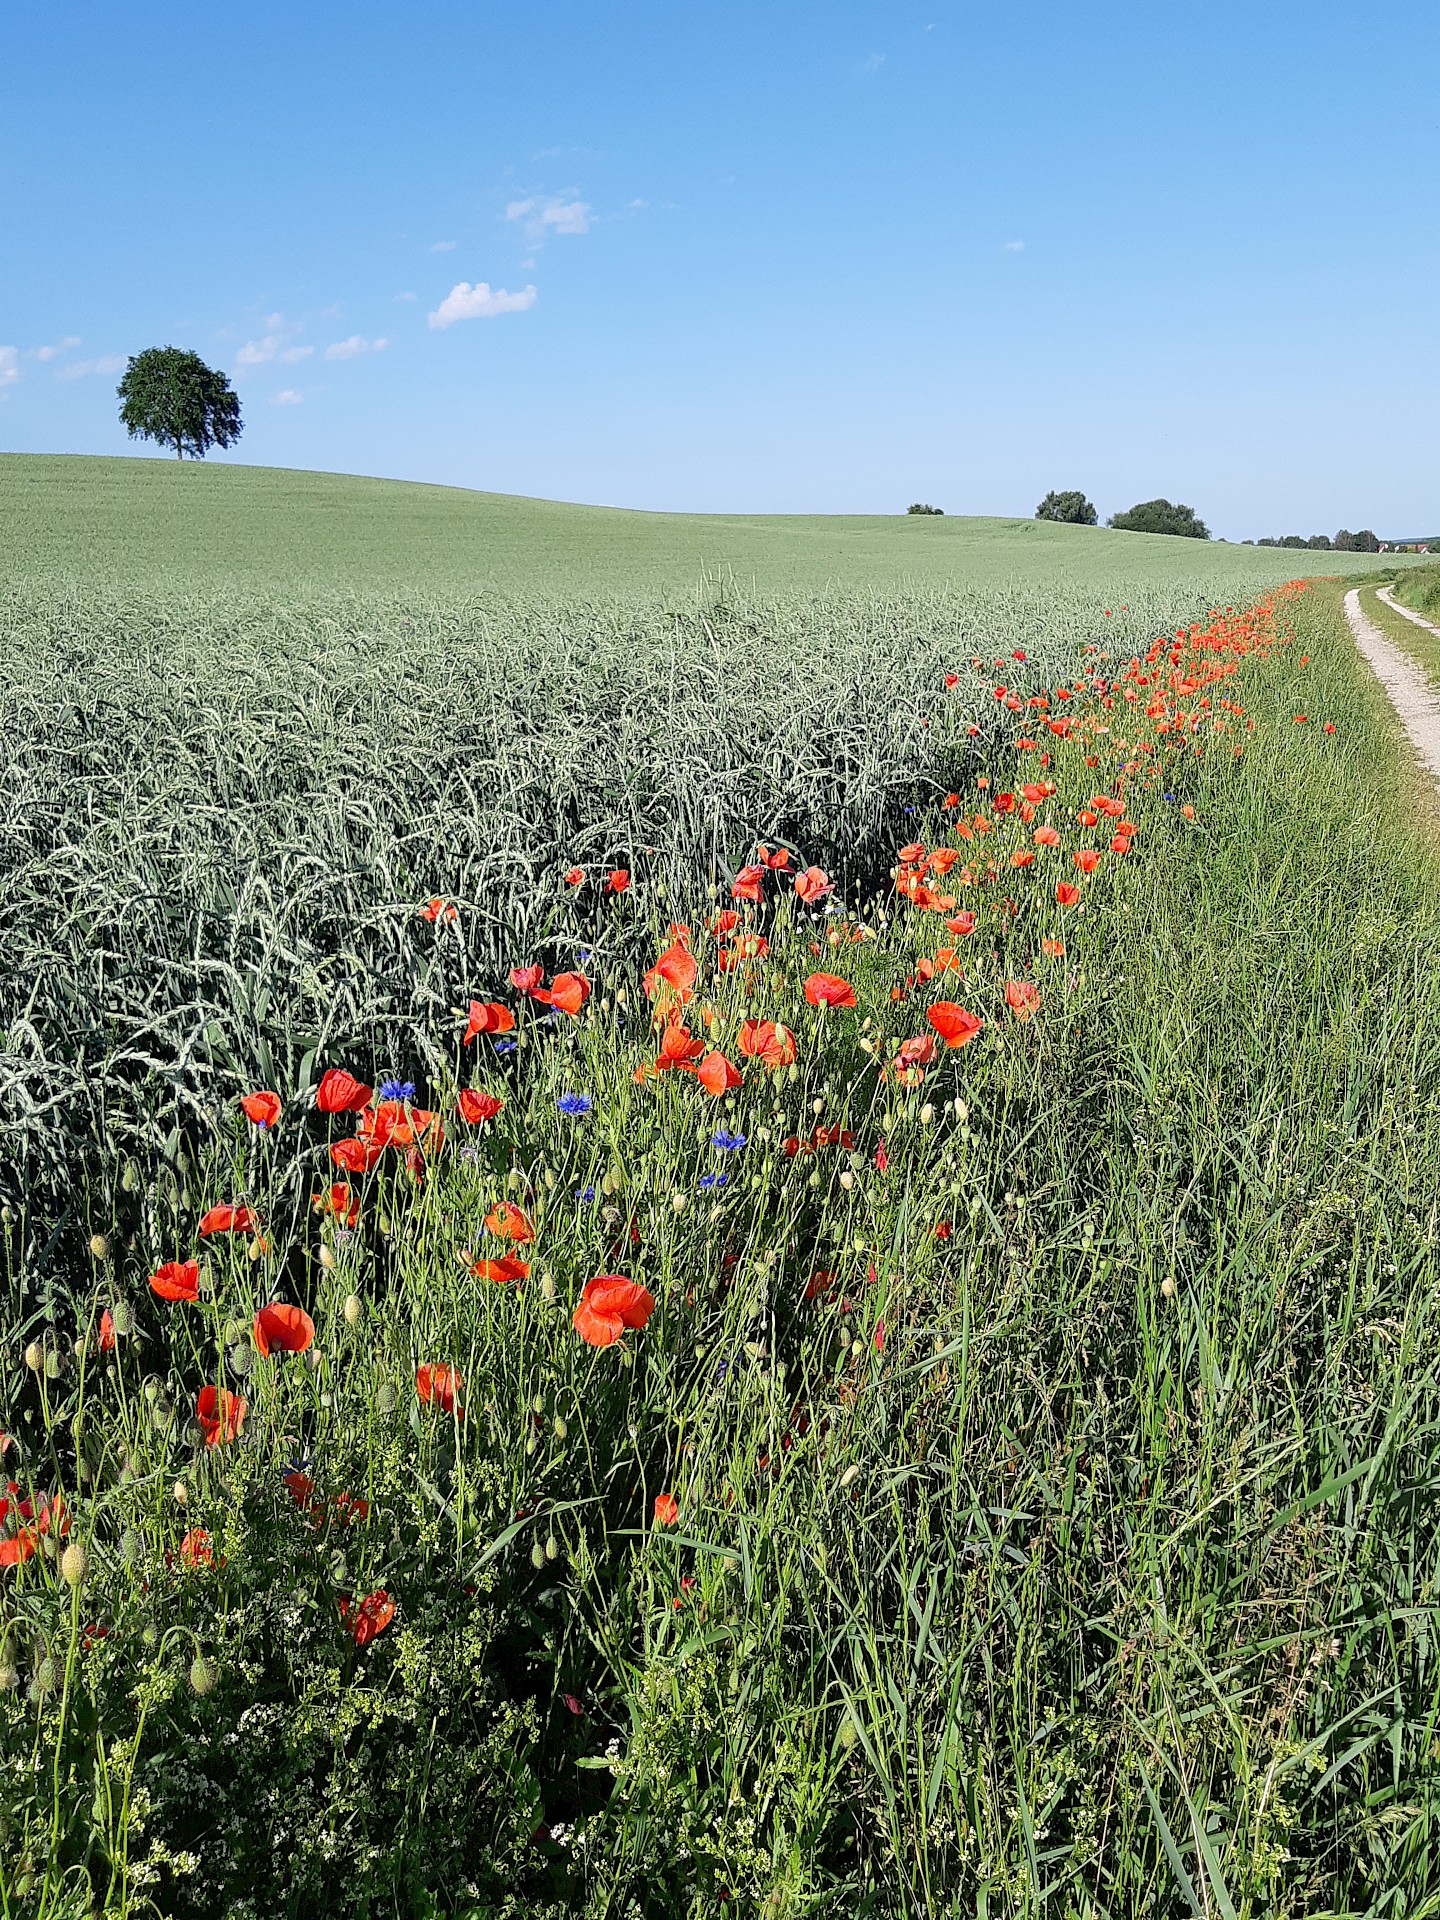 At the bottom left, you can see a cornfield with a flowering strip of red corn poppies and blue cornflowers along its right edge. The upper third of the picture is filled by the blue sky. Occasional trees can be seen on the horizon of the slightly hilly landscape.